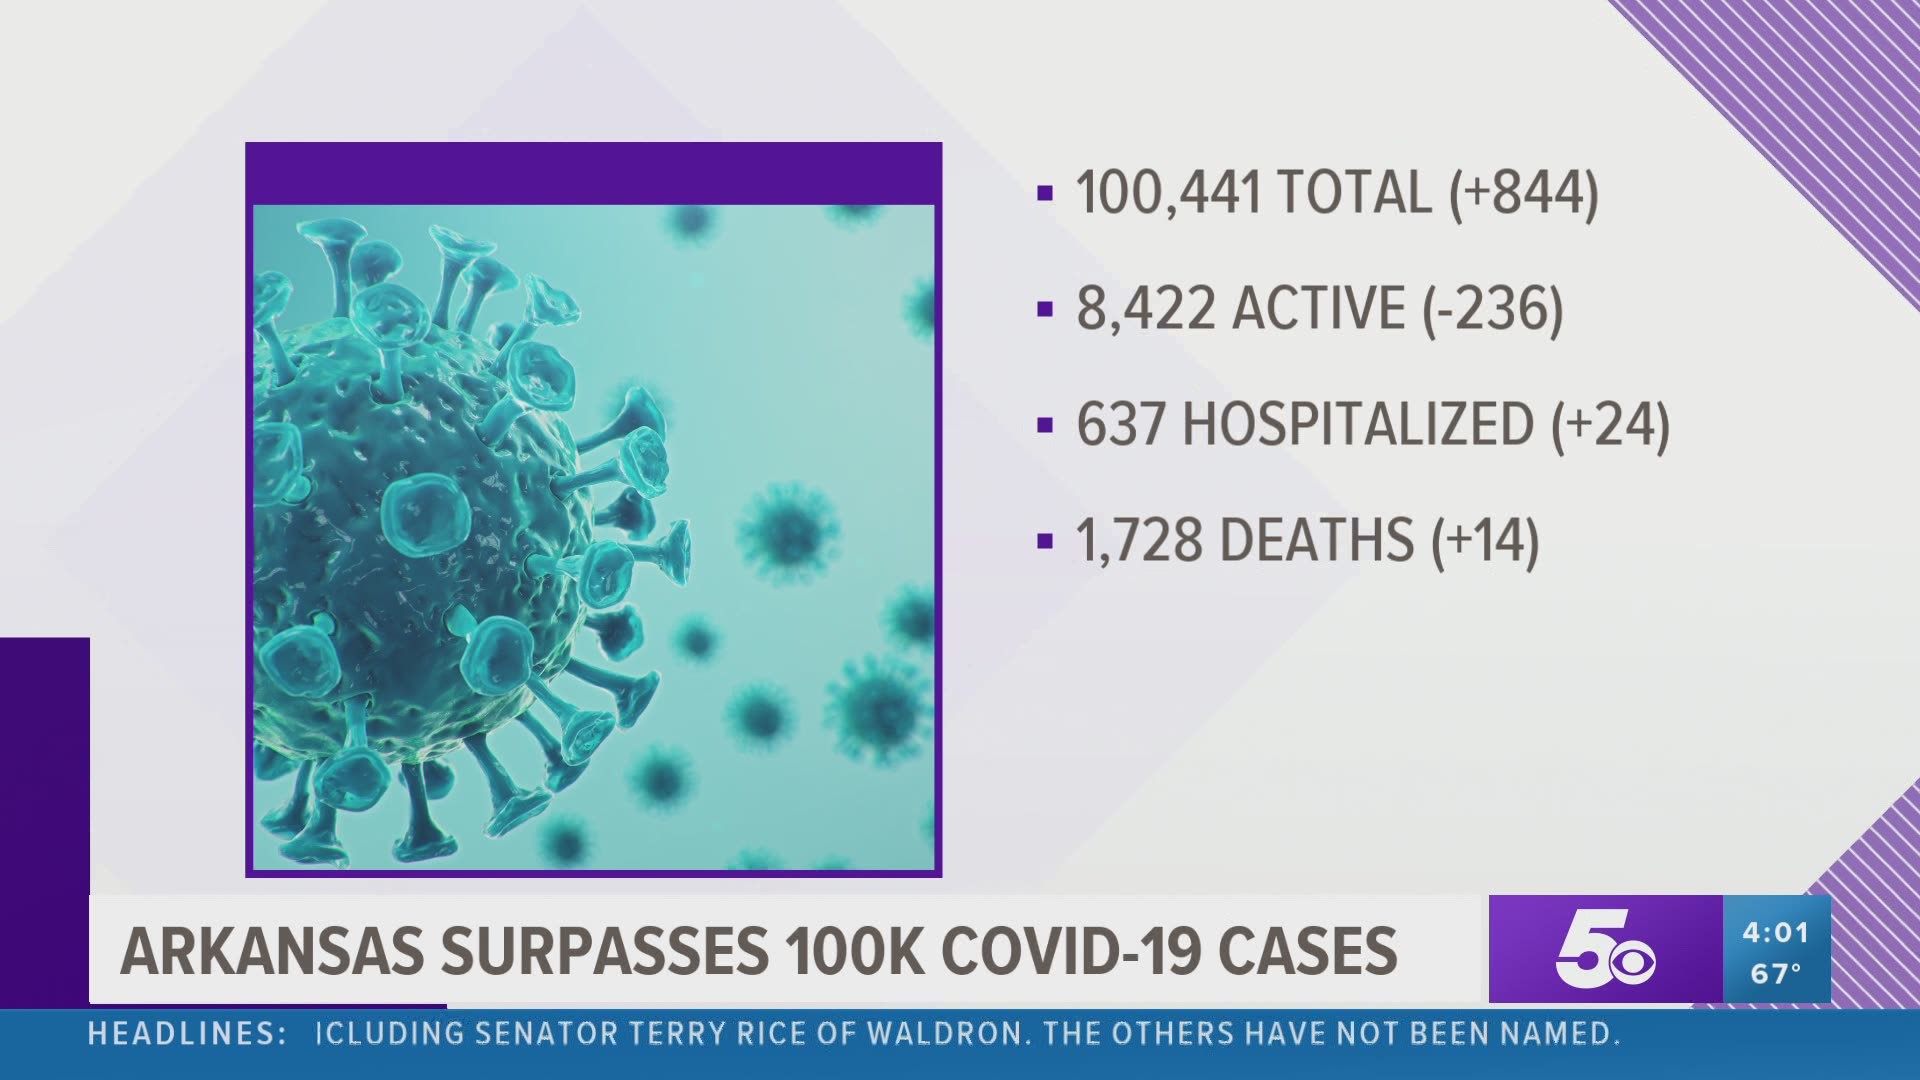 A look at the latest case numbers for the coronavirus in Arkansas on Tuesday, October 20. https://bit.ly/3iqGRnx